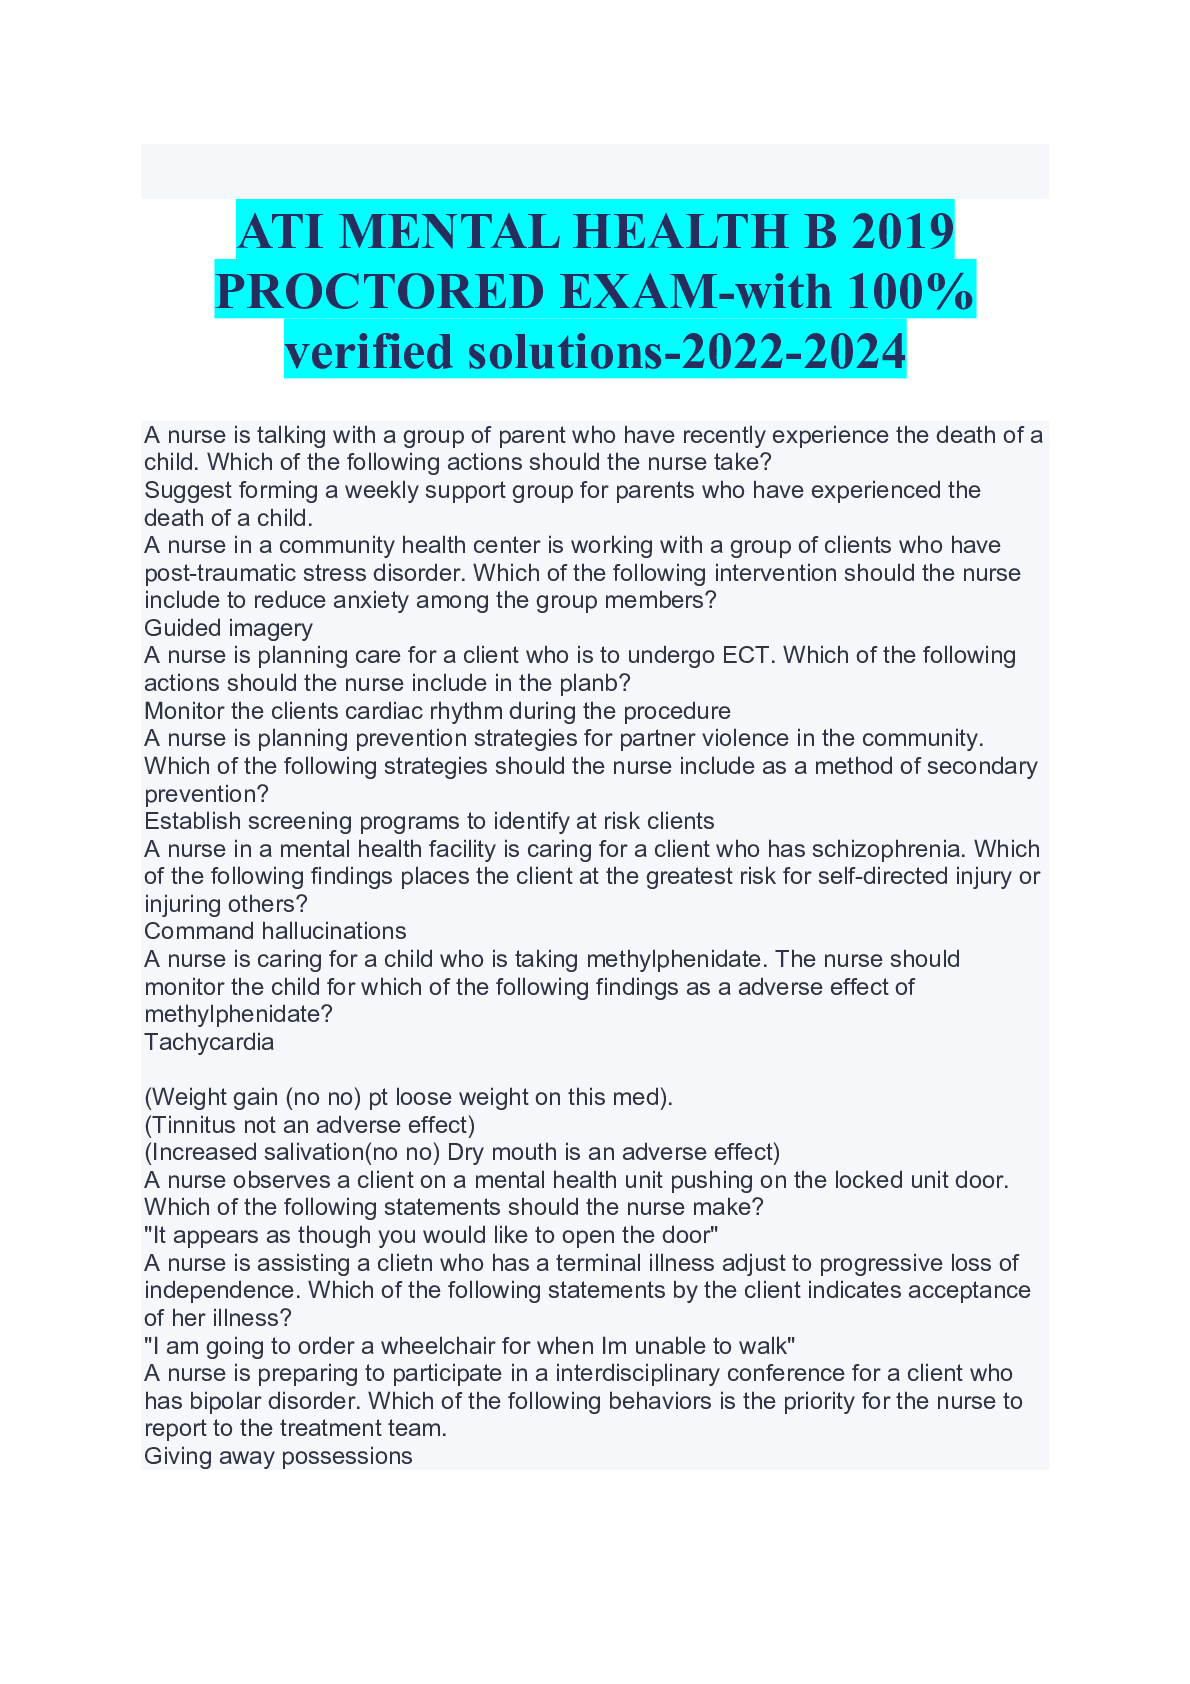 ATI MENTAL HEALTH B 2019 PROCTORED EXAMwith 100 verified solutions